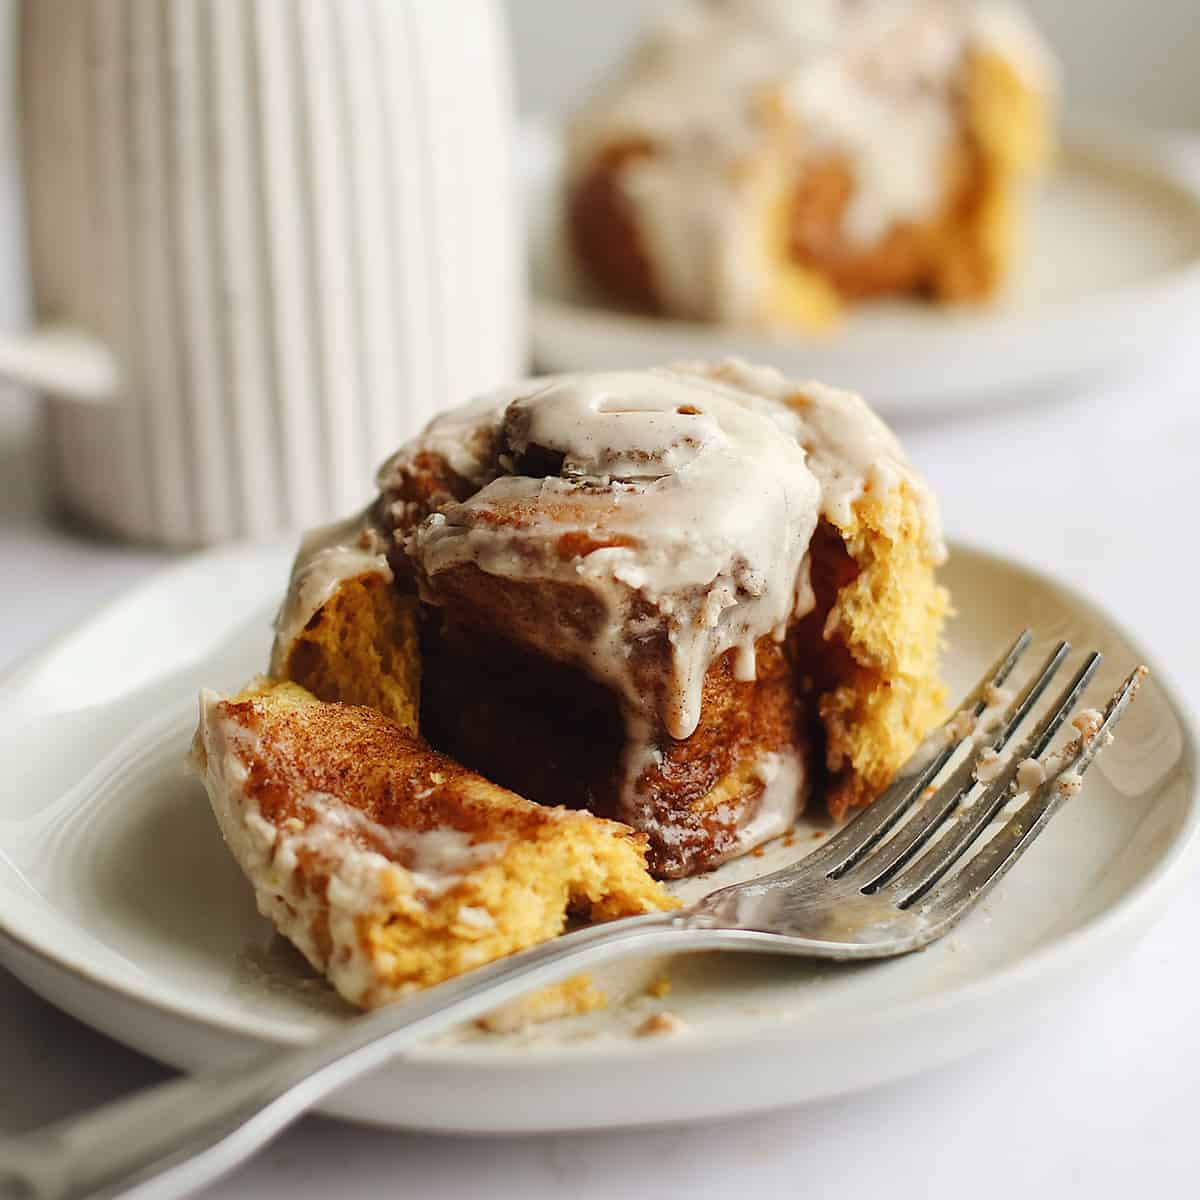 front view of a Pumpkin Cinnamon Roll on a plate with a fork